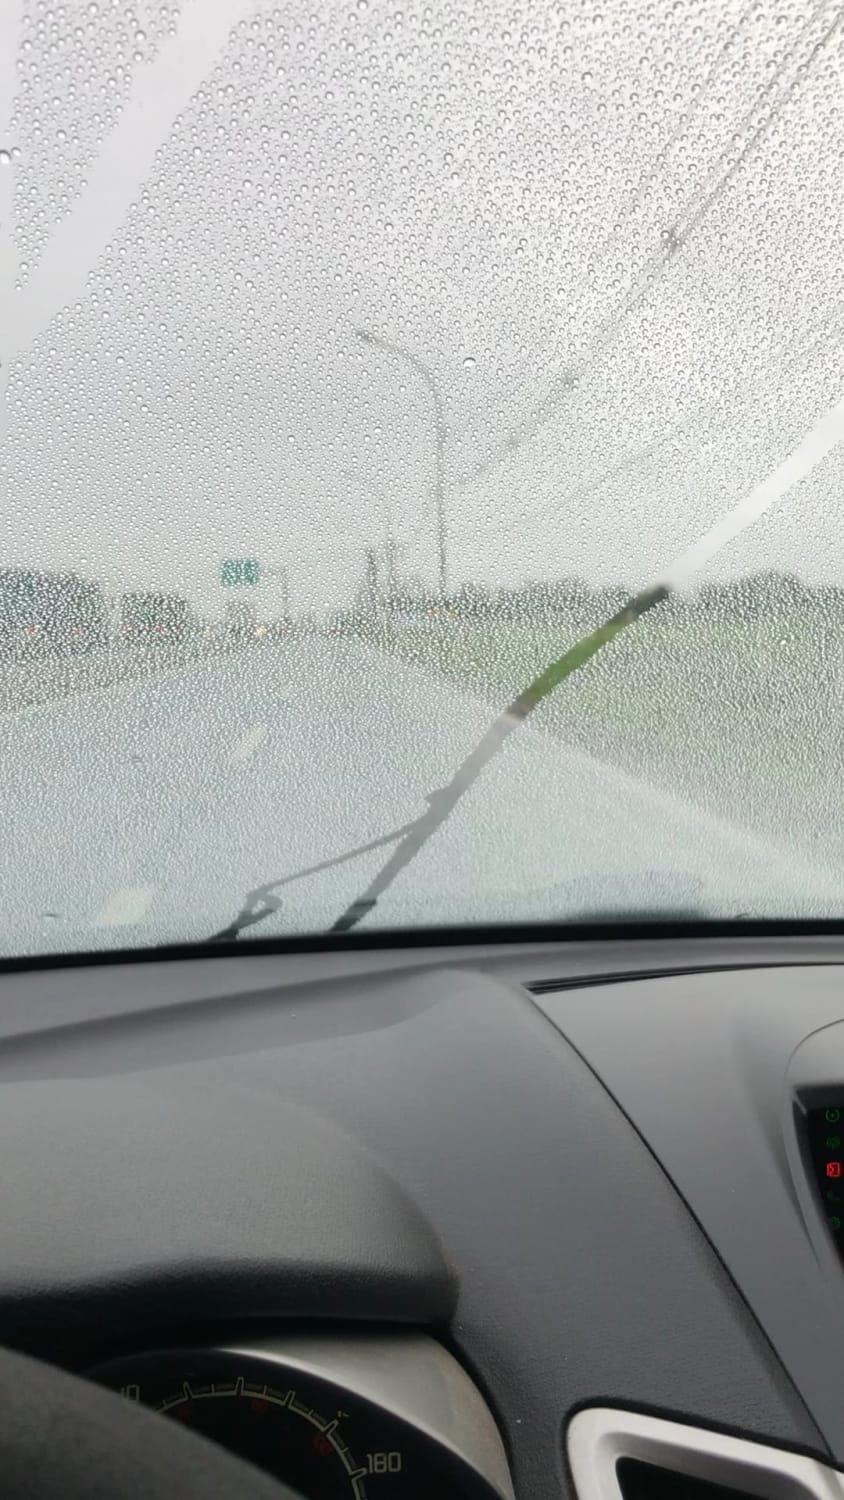 Windshield with hydrophobic coating. Once you get enough speed, you don’t even need the wiper.